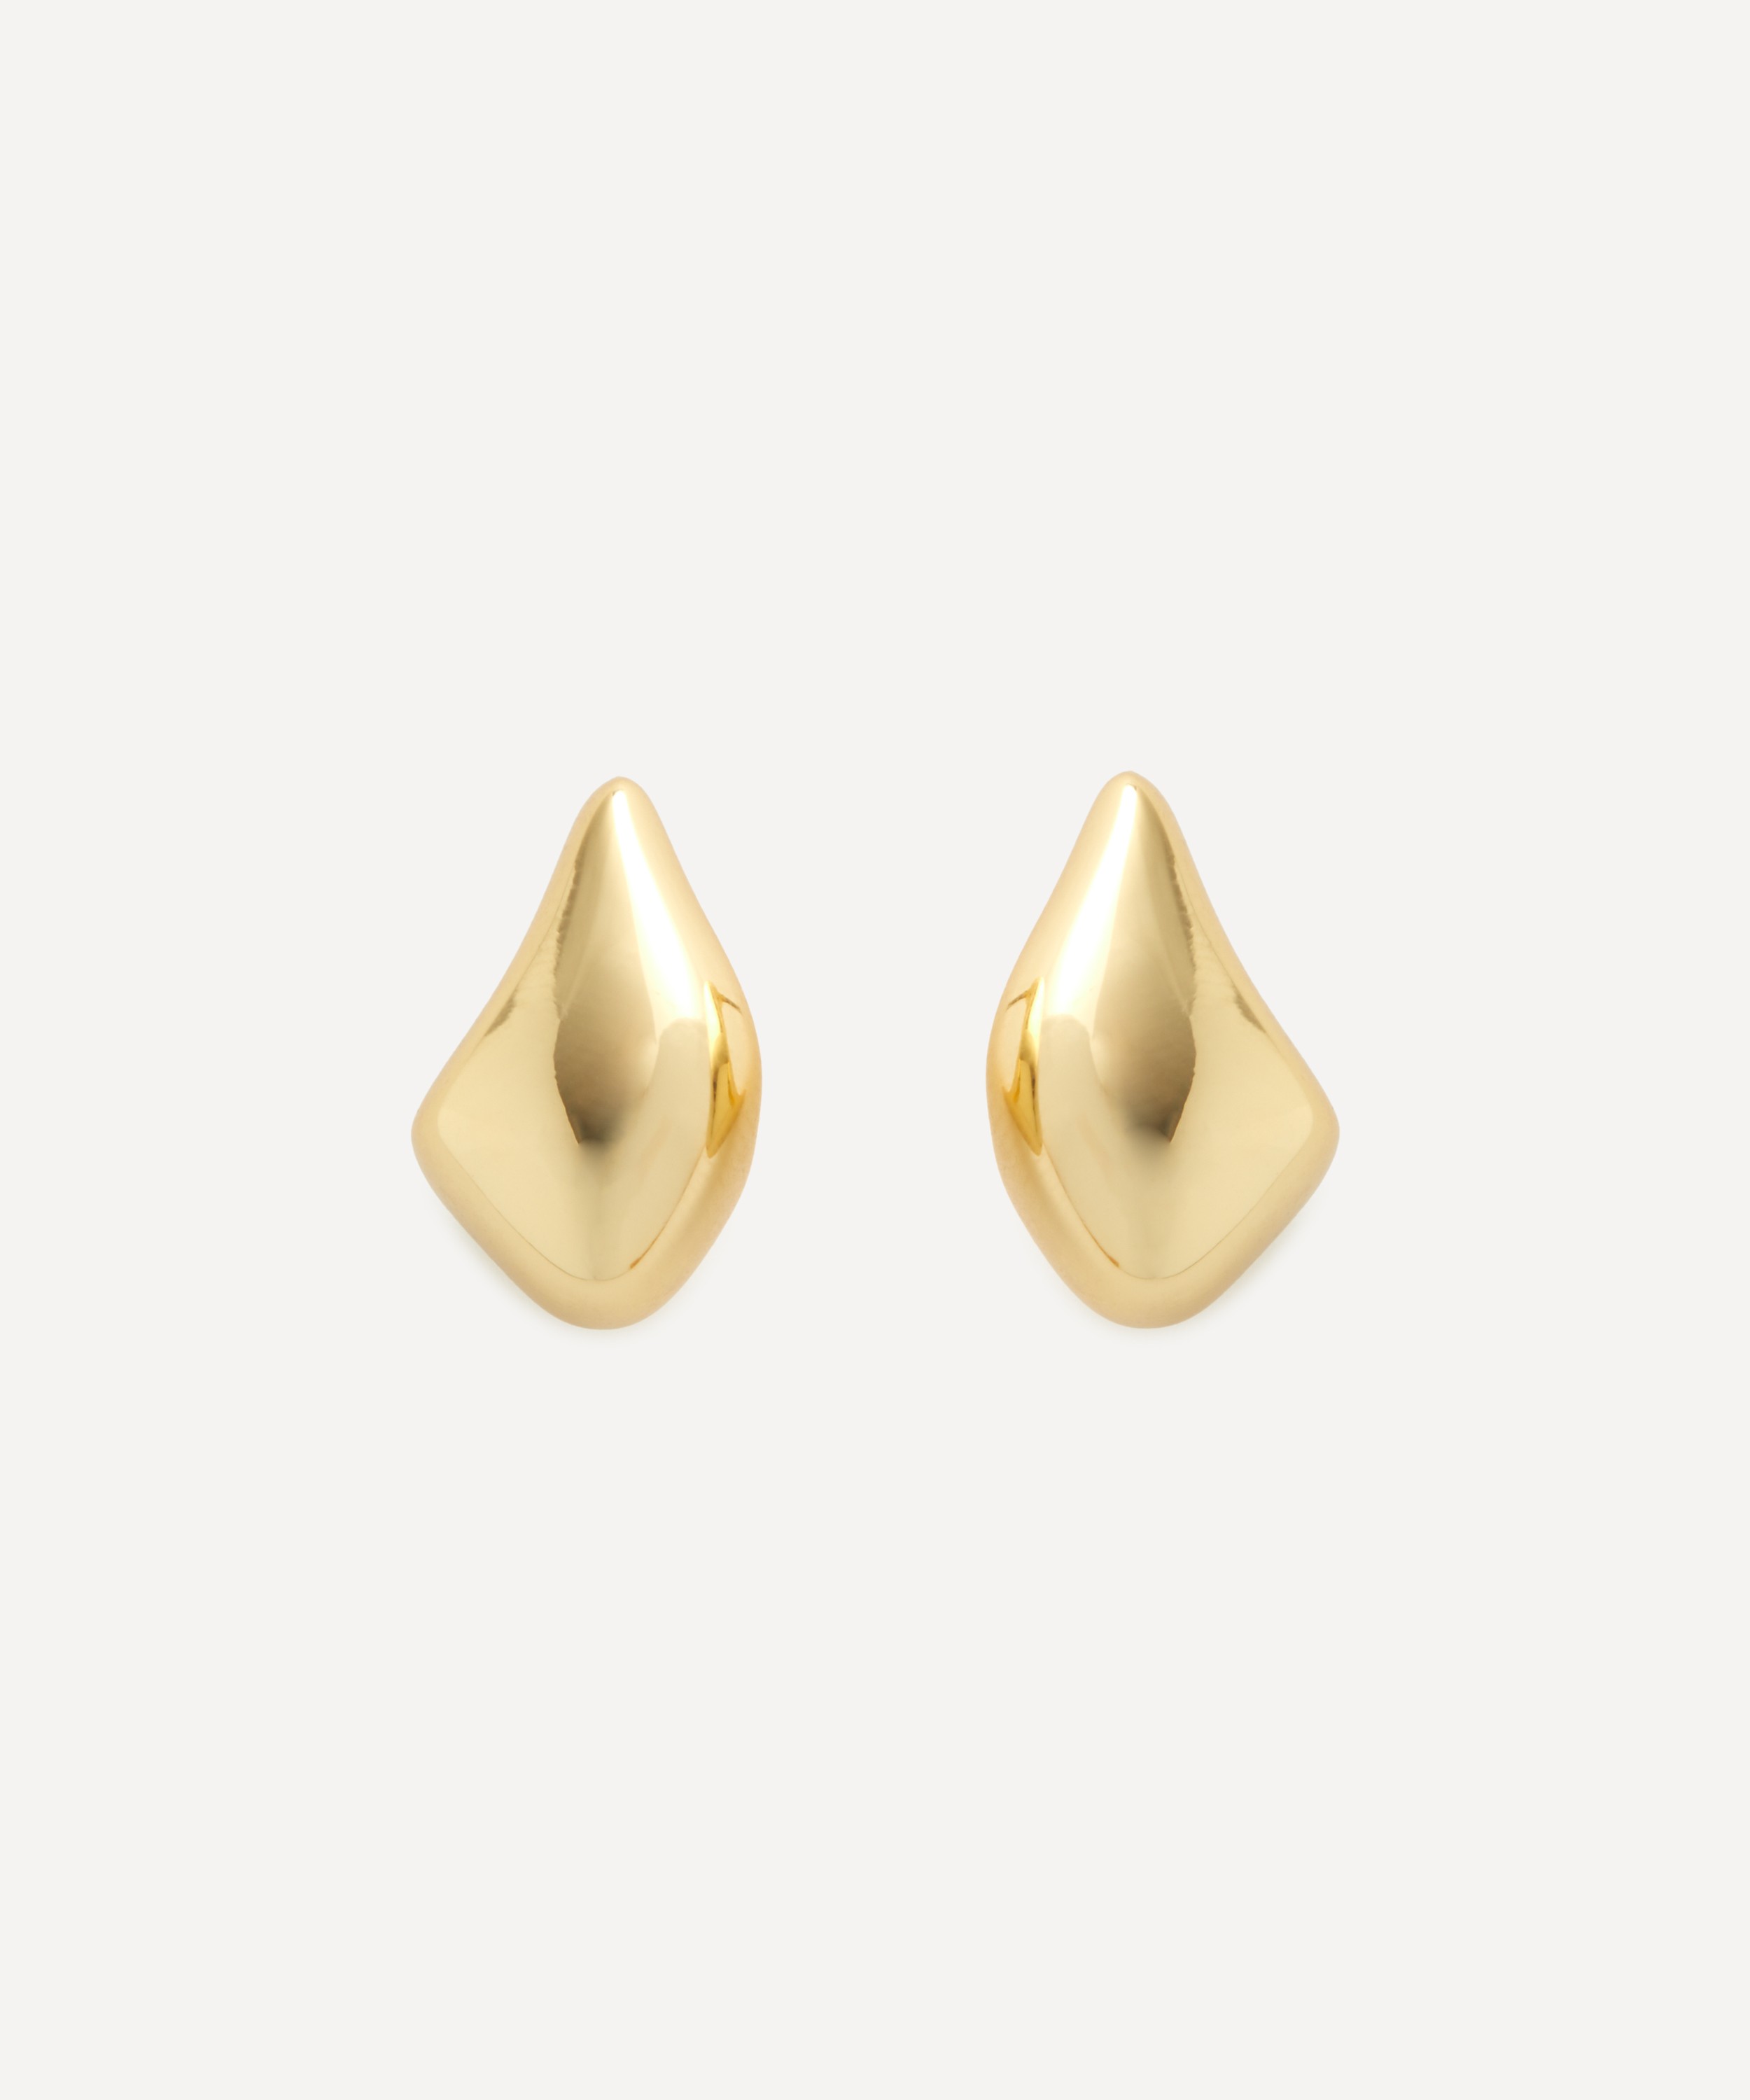 SHASHI - 18ct Gold-Plated Odyssey Drop Earrings